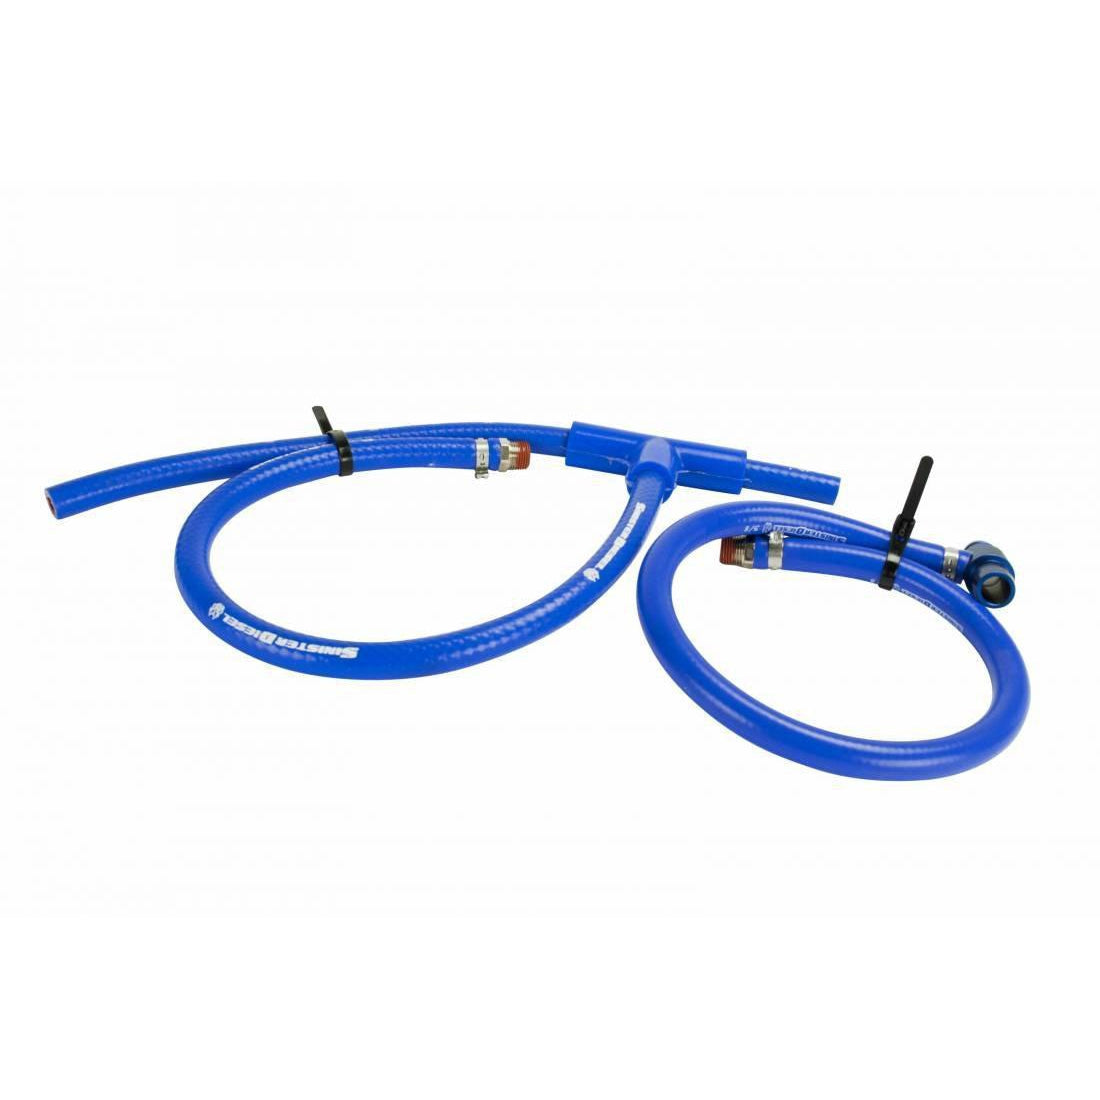 2003-2007 Powerstroke Replacement Coolant Filter Hose for Ford 6.0L (New Style) (SD-6.0PCFH03-02-20)-Coolant Hose Kit-Sinister-SD-6.0PCFH03-02-20-Dirty Diesel Customs